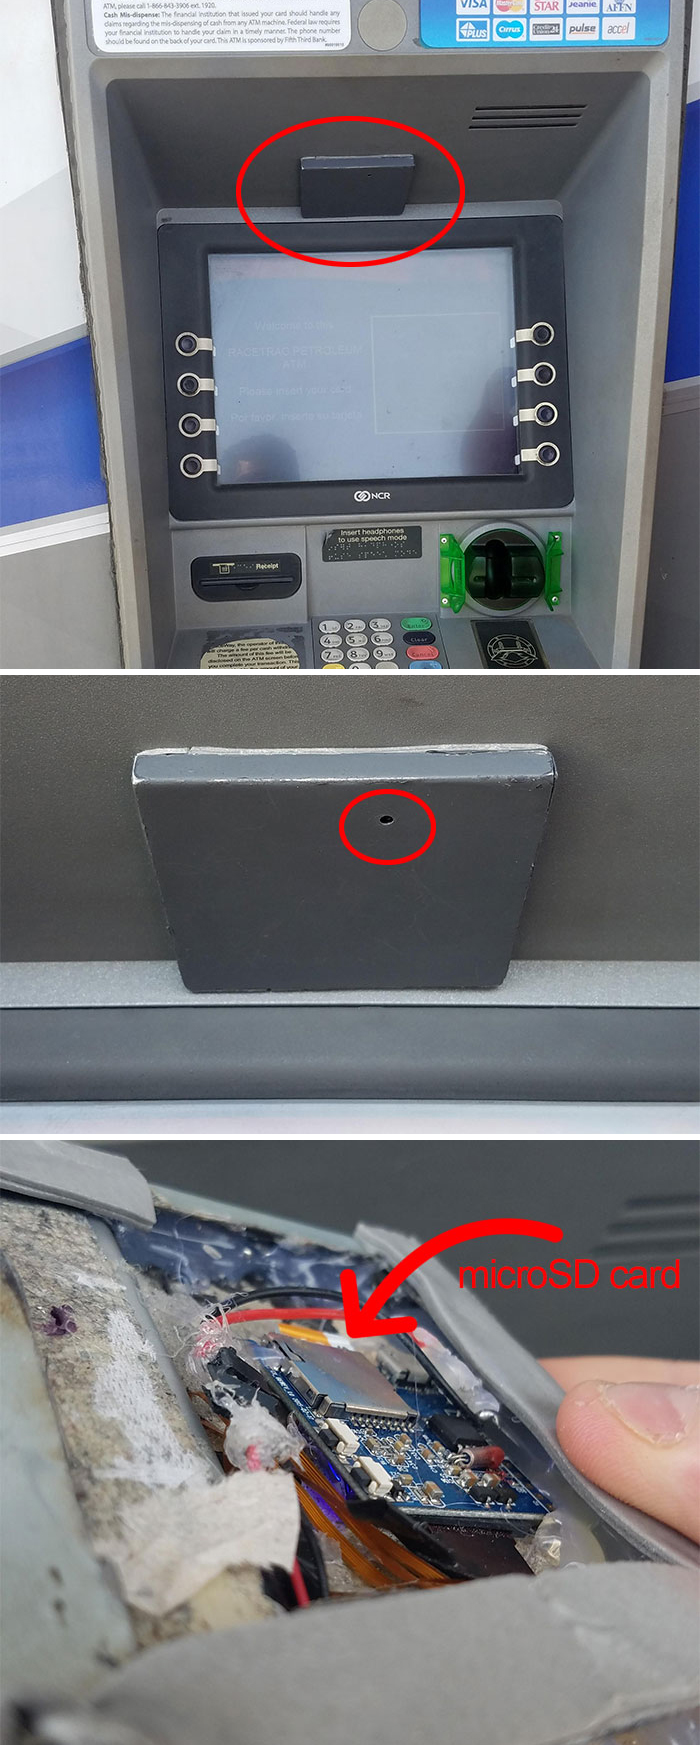 Went To An ATM I Frequently Use In Houston And Notice Something Different... What Is This Grey Box?